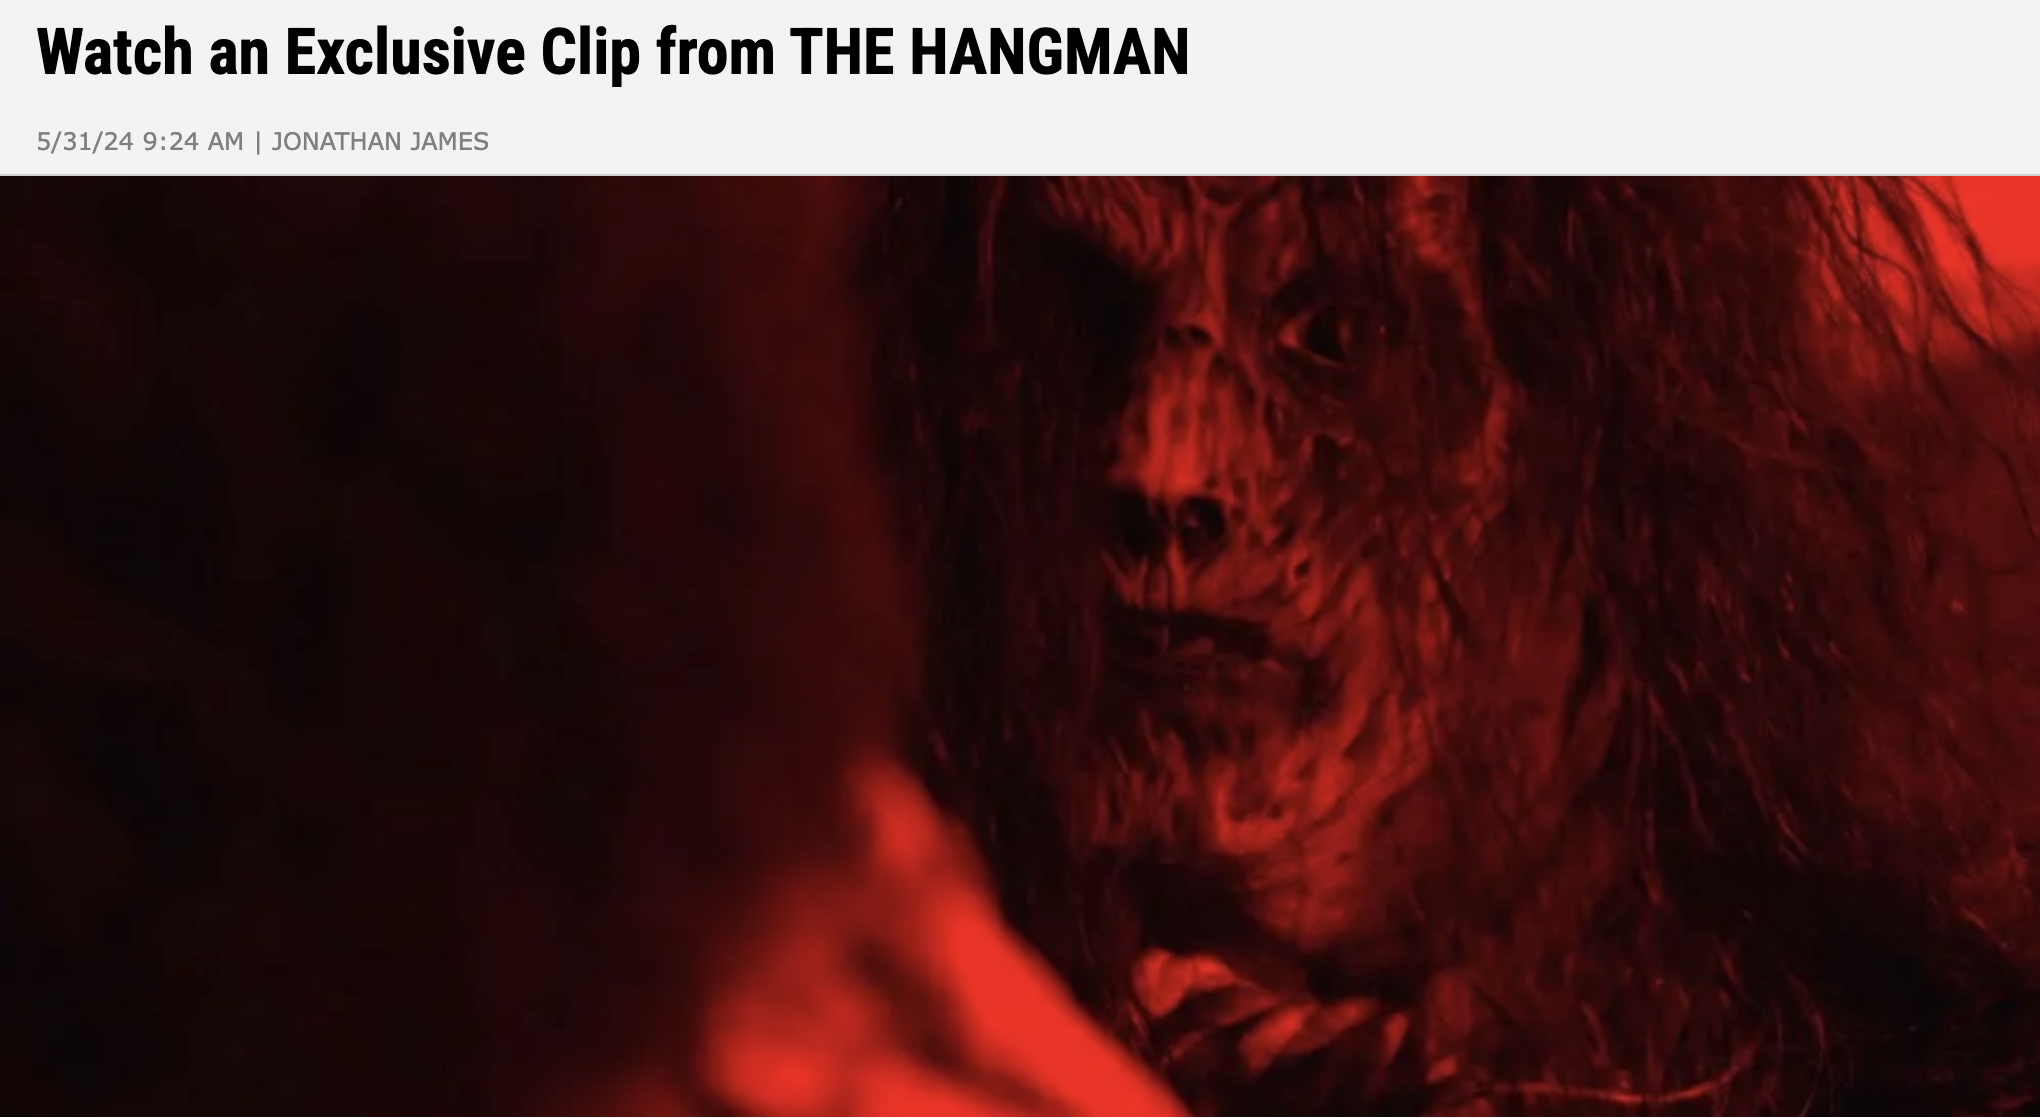 Watch an Exclusive Clip from THE HANGMAN